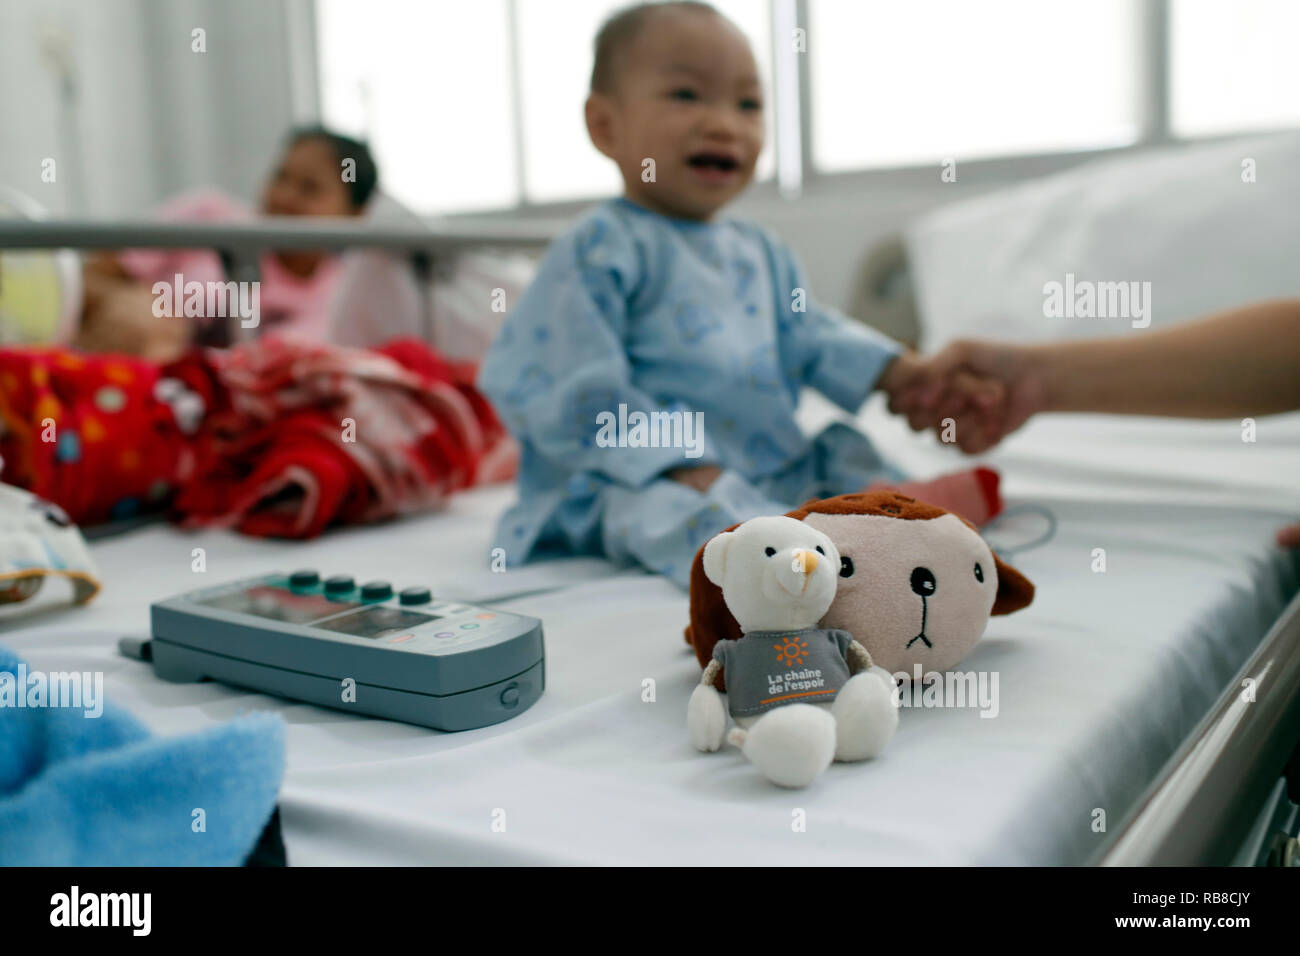 Tam Duc Cardiology Hospital. Child suffering of heart disease. Ho Chi Minh City. Vietnam. Stock Photo